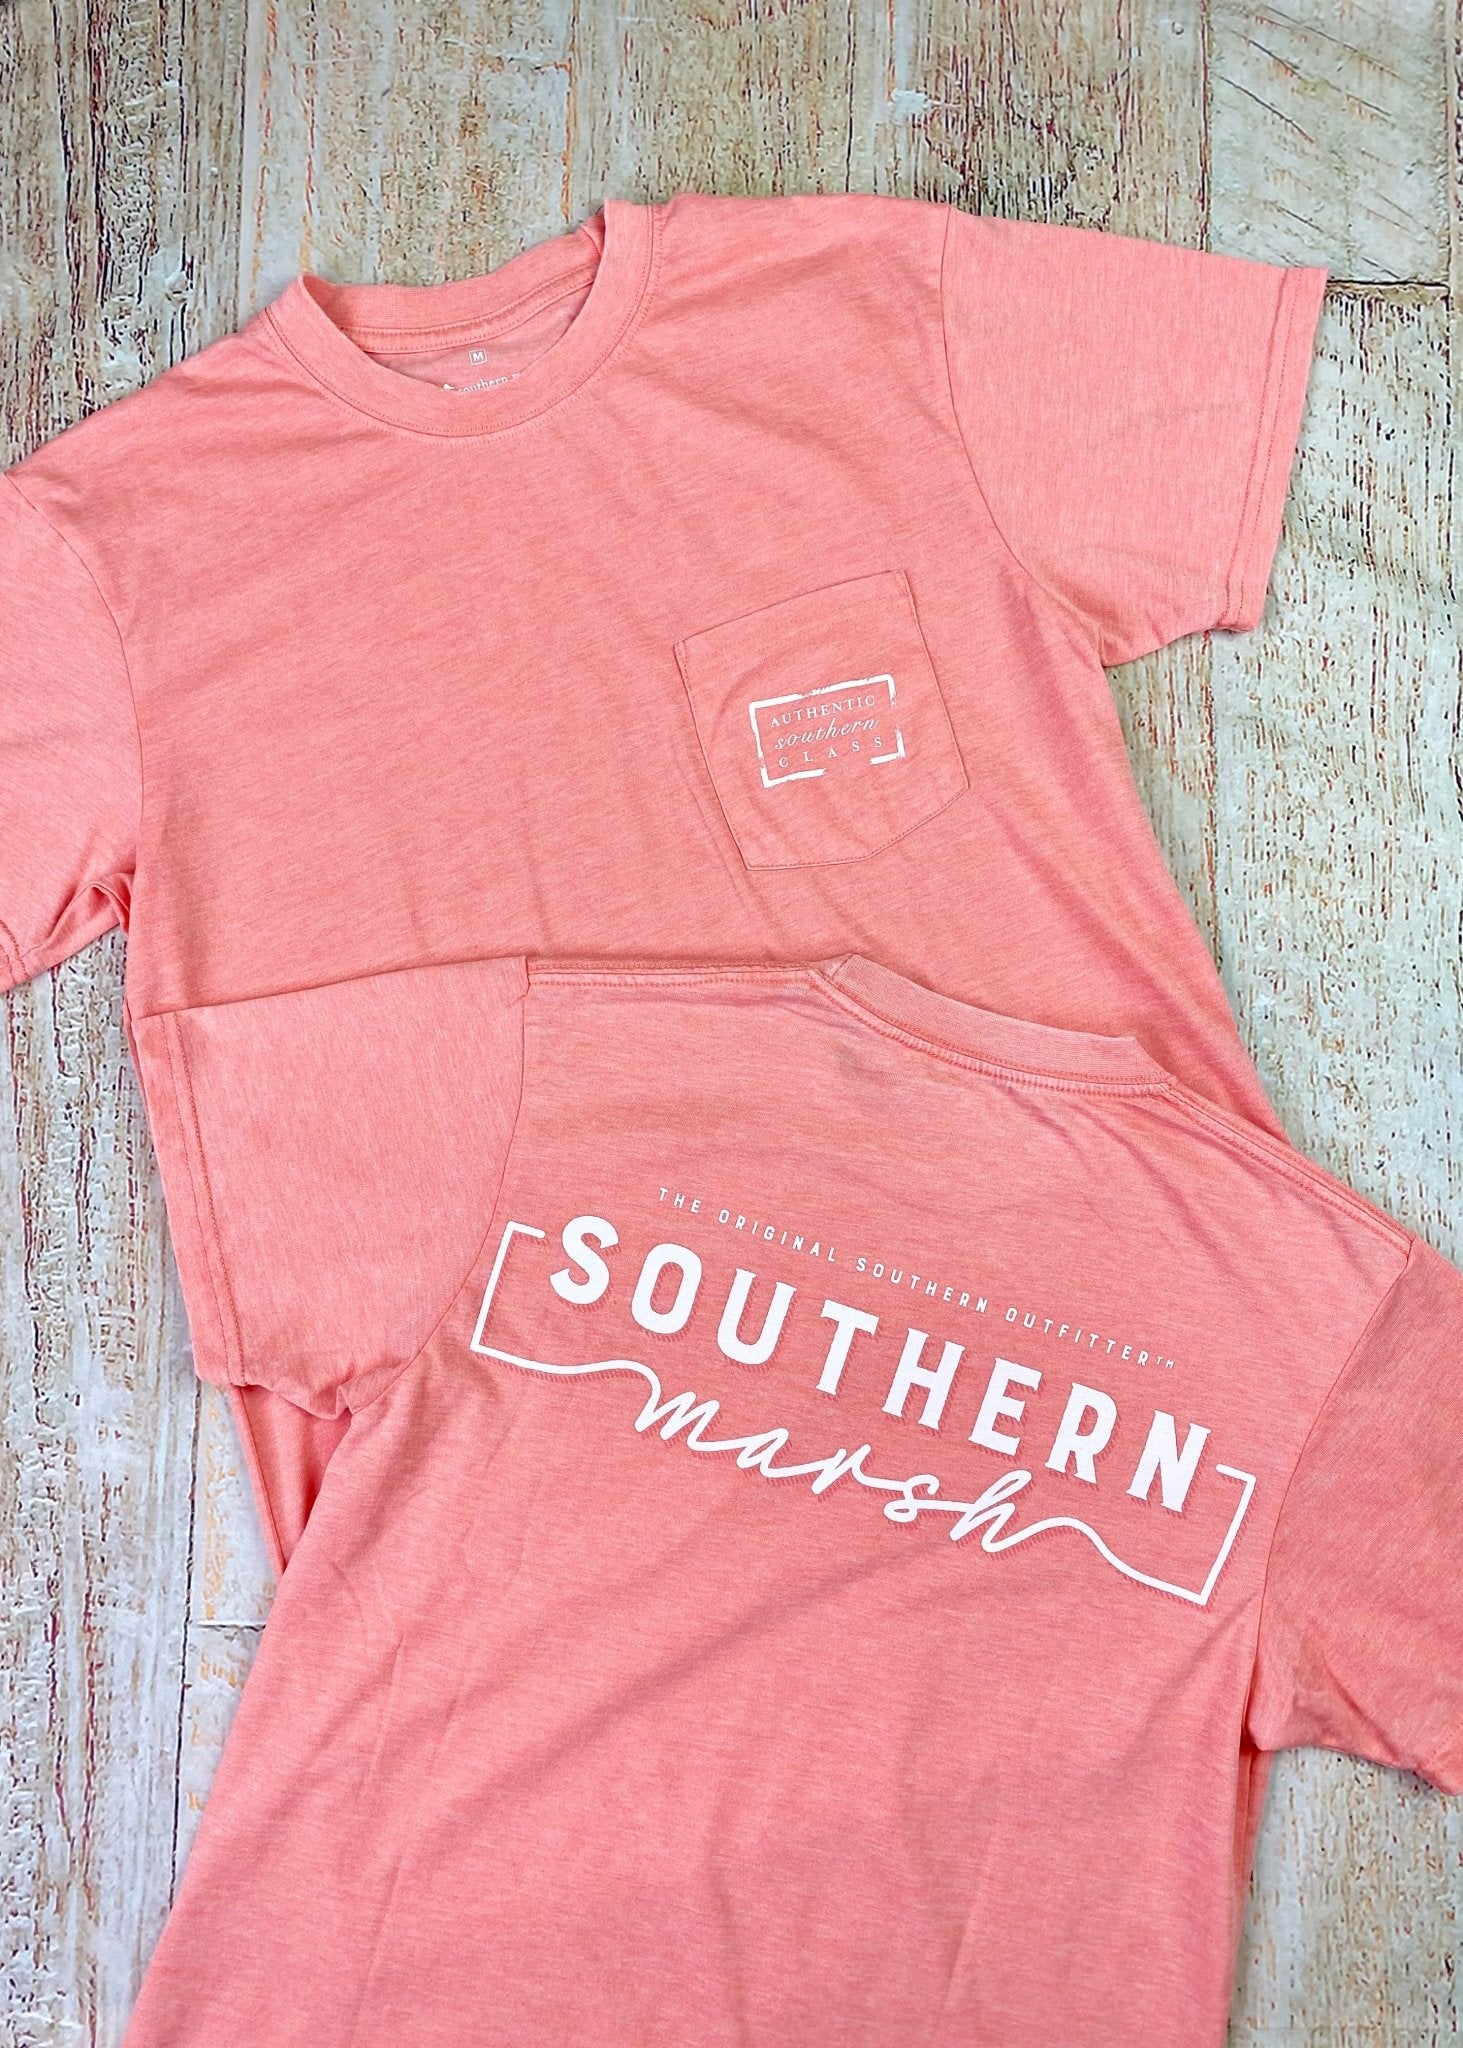 Southern Marsh Seawash Tee - Waves - Coral - Graphic Tee -Jimberly's Boutique-Olive Branch-Mississippi